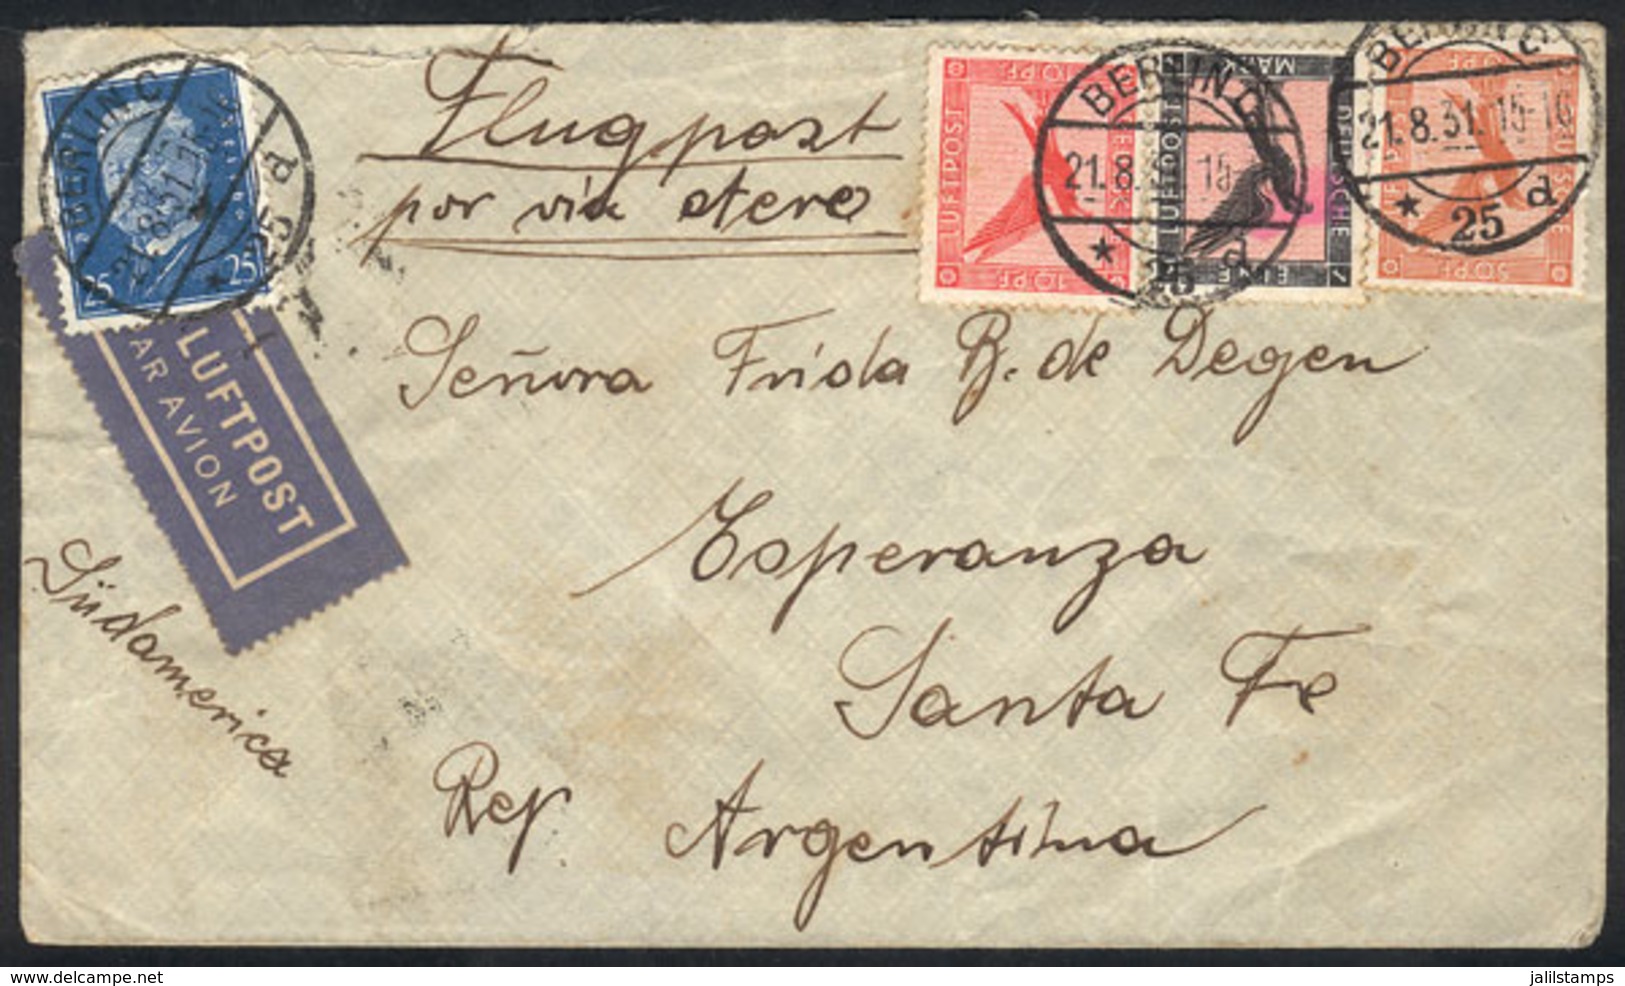 GERMANY: Airmail Cover Sent From Berlin To Argentina On 21/AU/1931 By Air France (transit Backstamp Of Strasbourg) Frank - Precursores